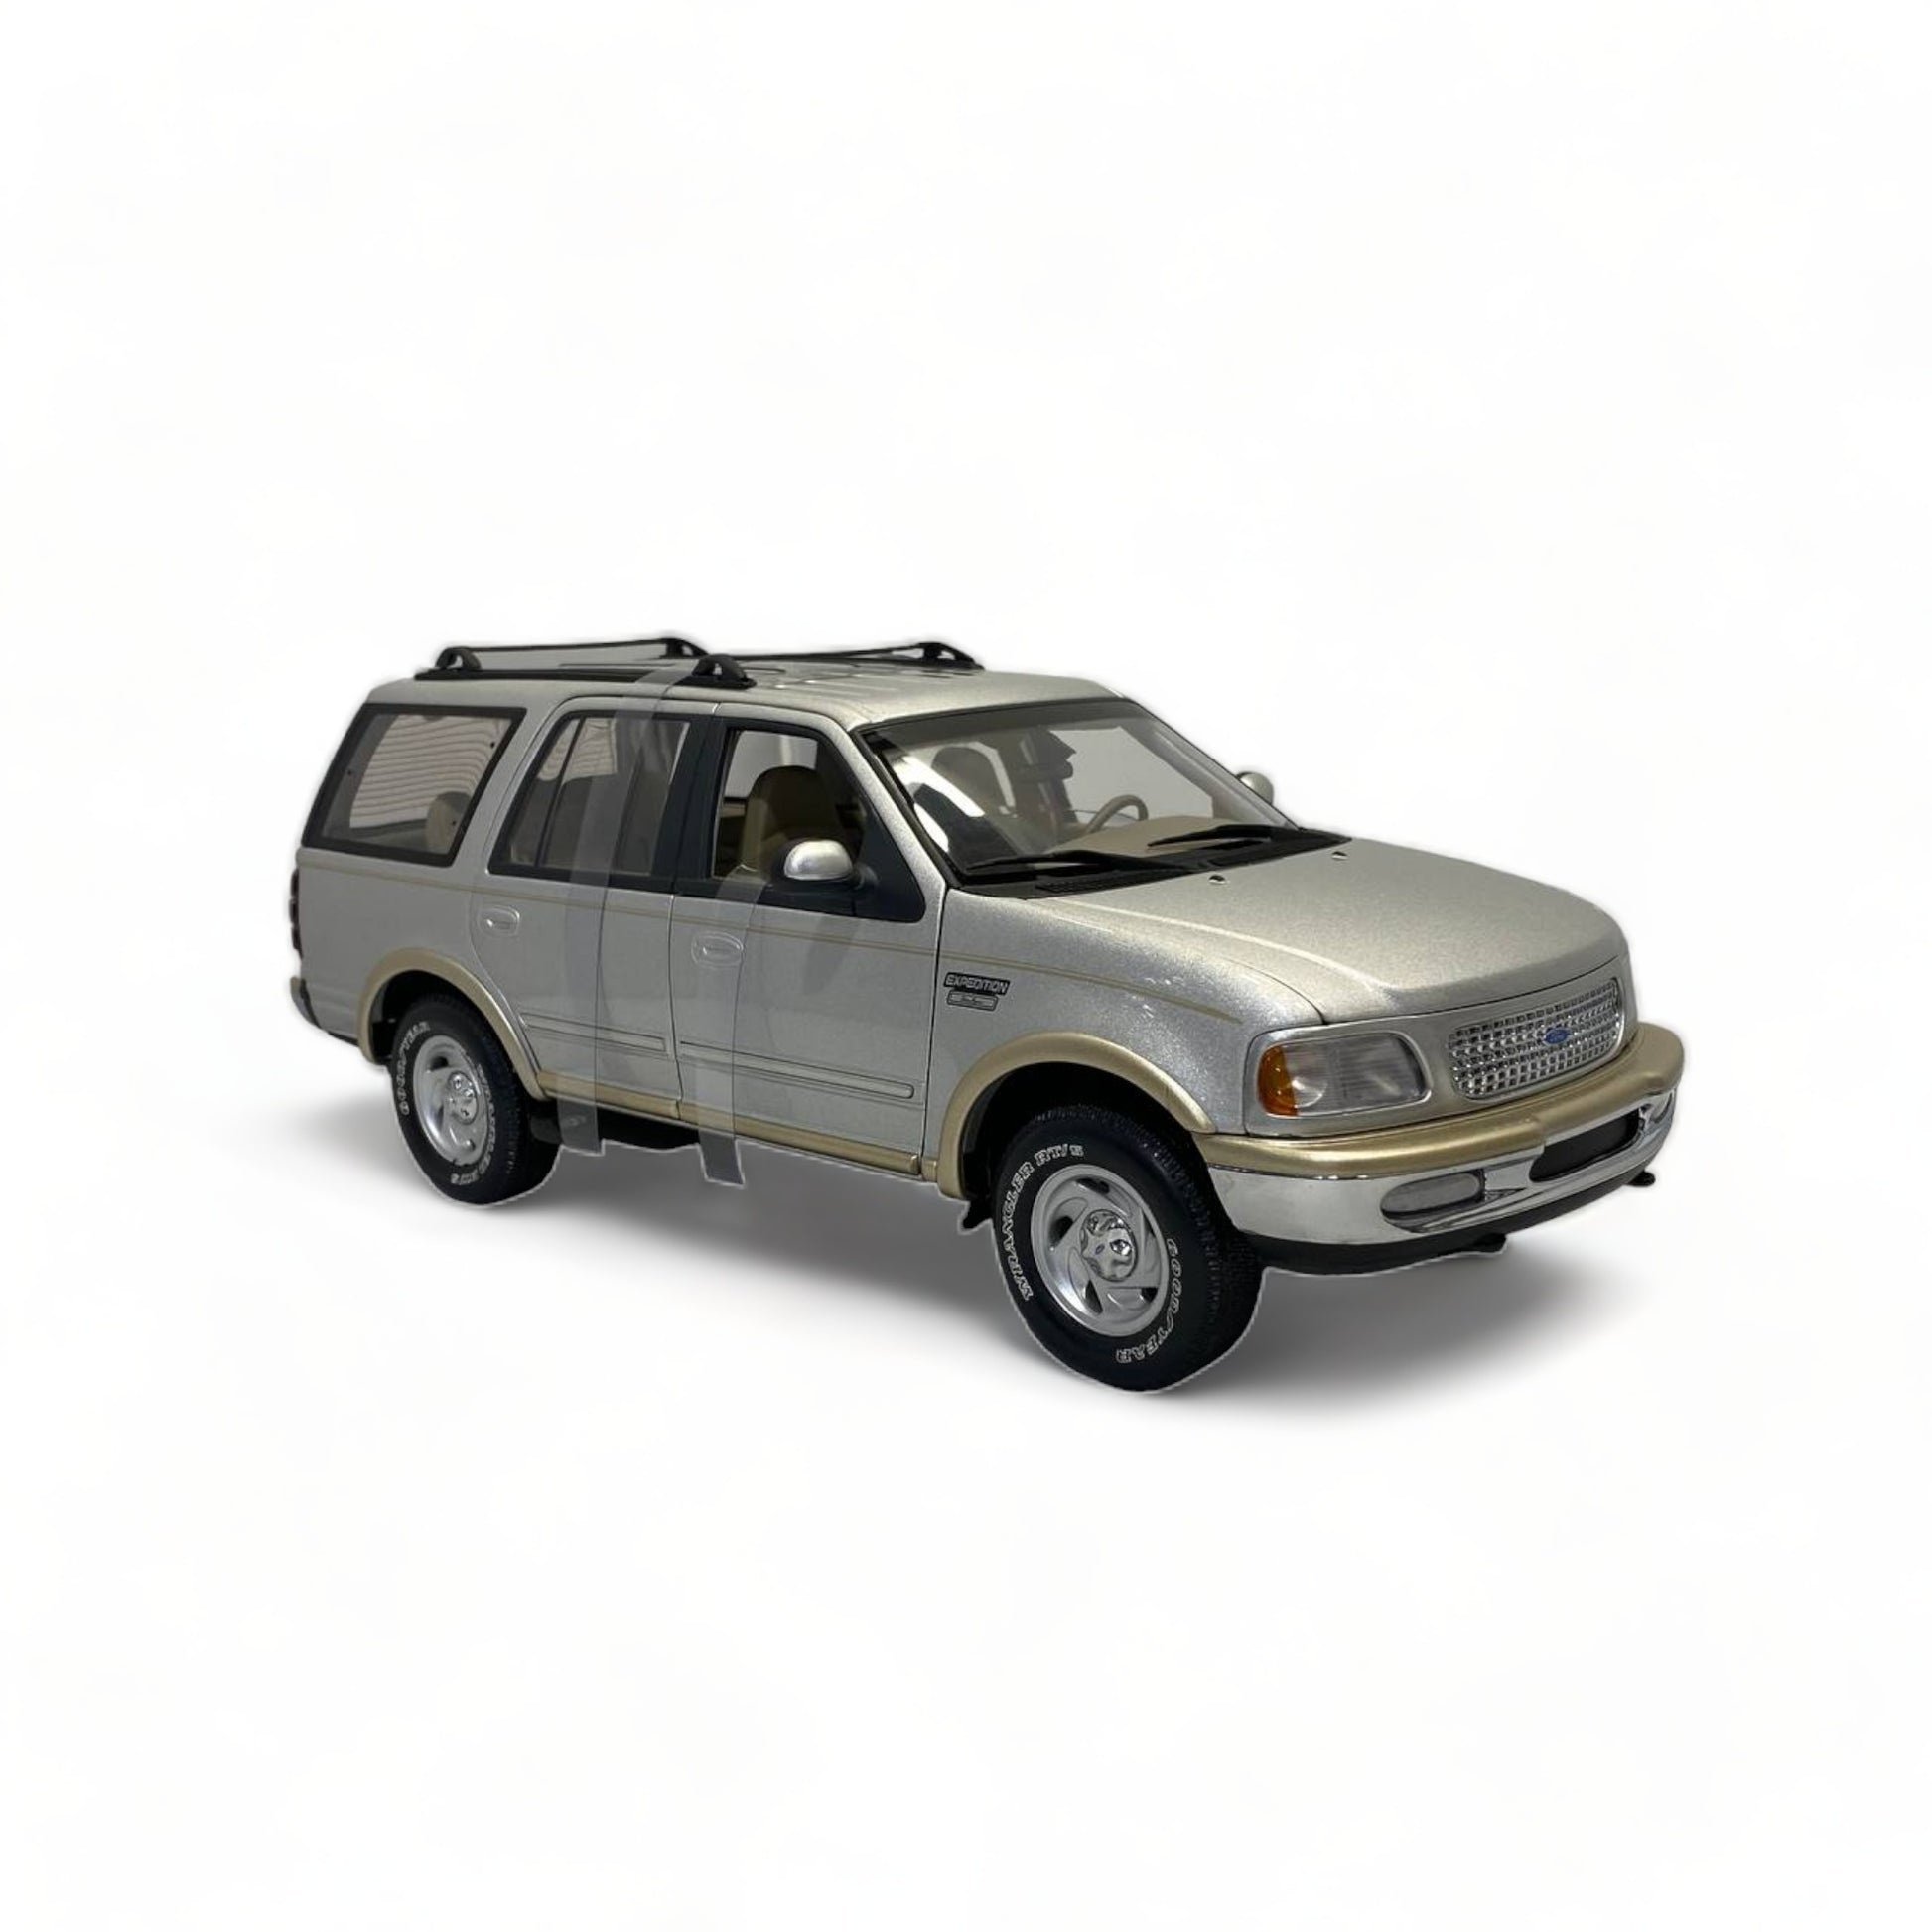 UT Models Ford Expedition (1/18 Scale)|Sold in Dturman.com Dubai UAE.